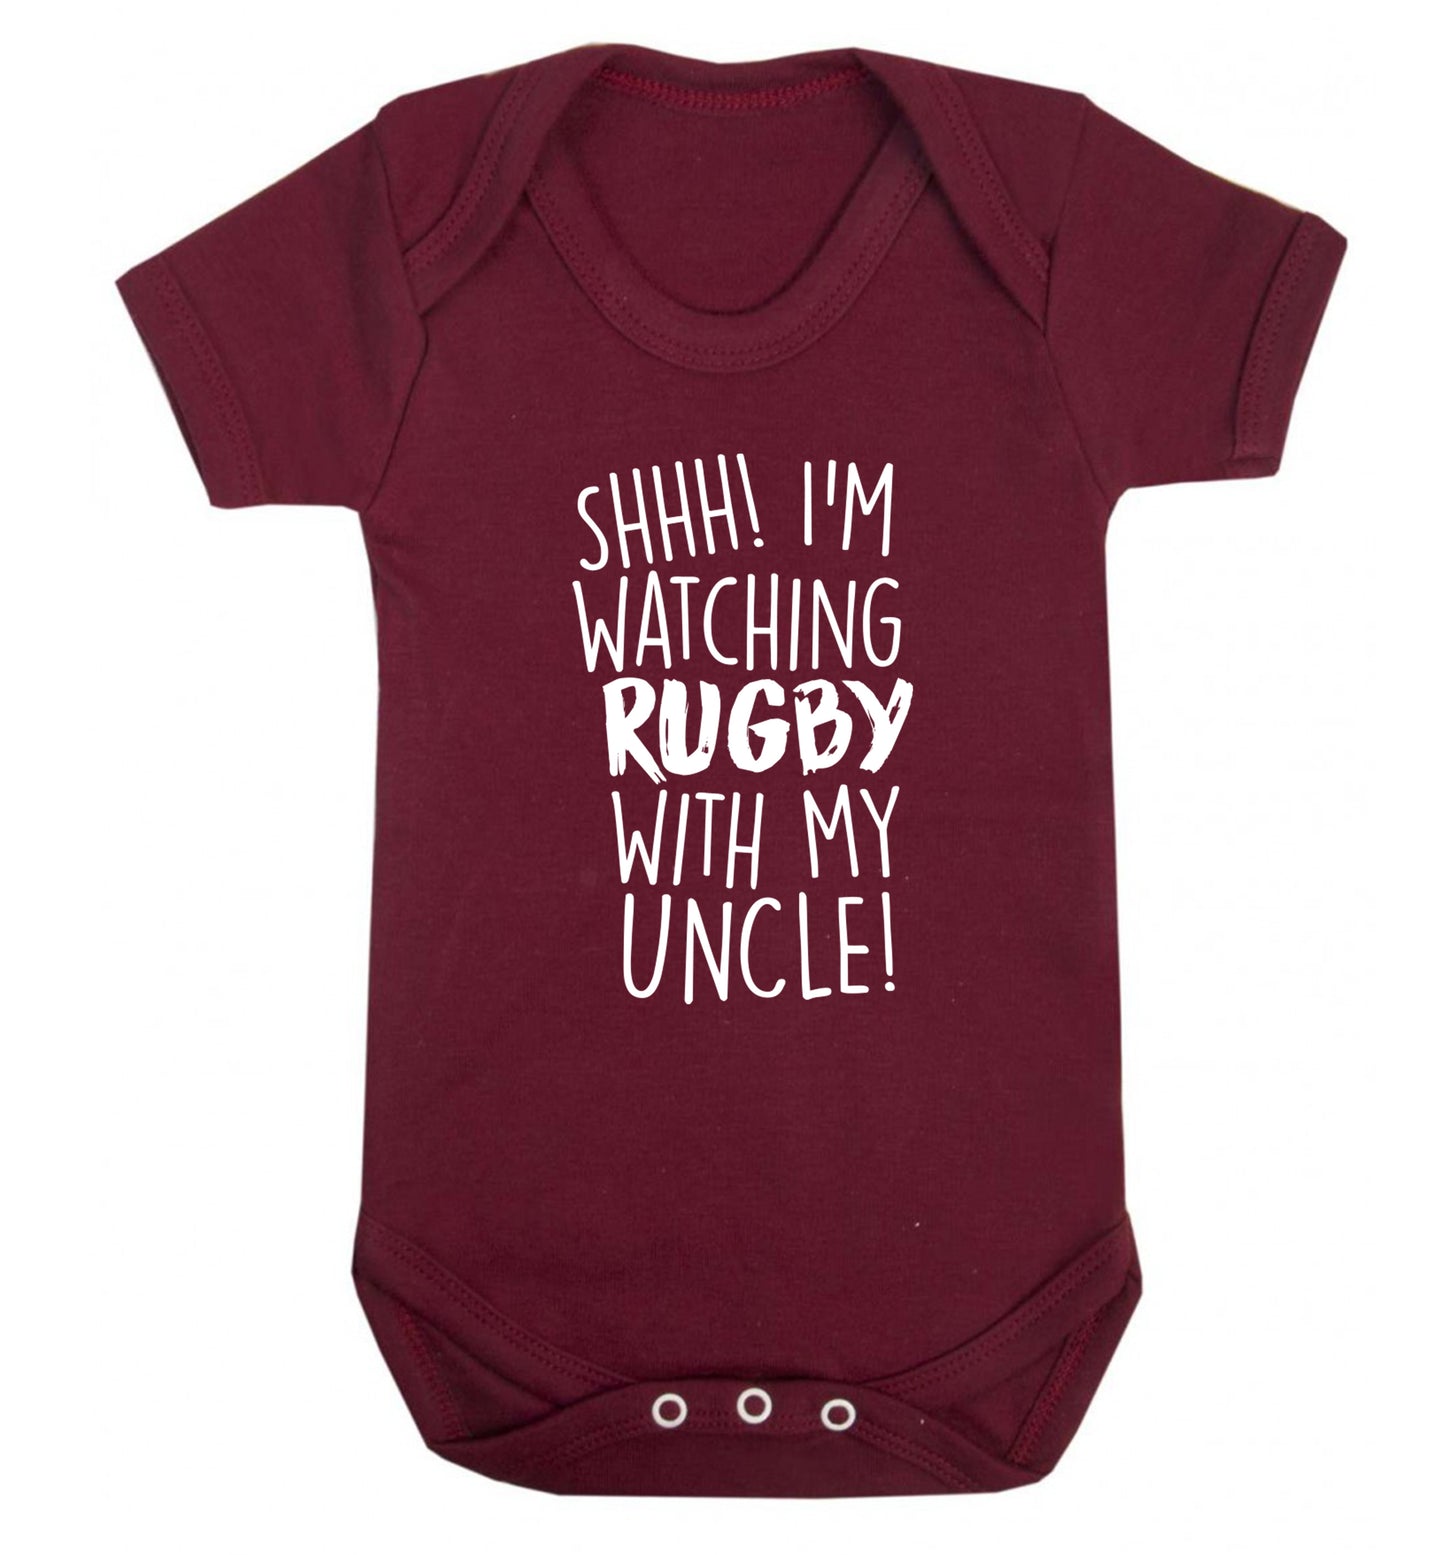 Shh.. I'm watching rugby with my uncle Baby Vest maroon 18-24 months